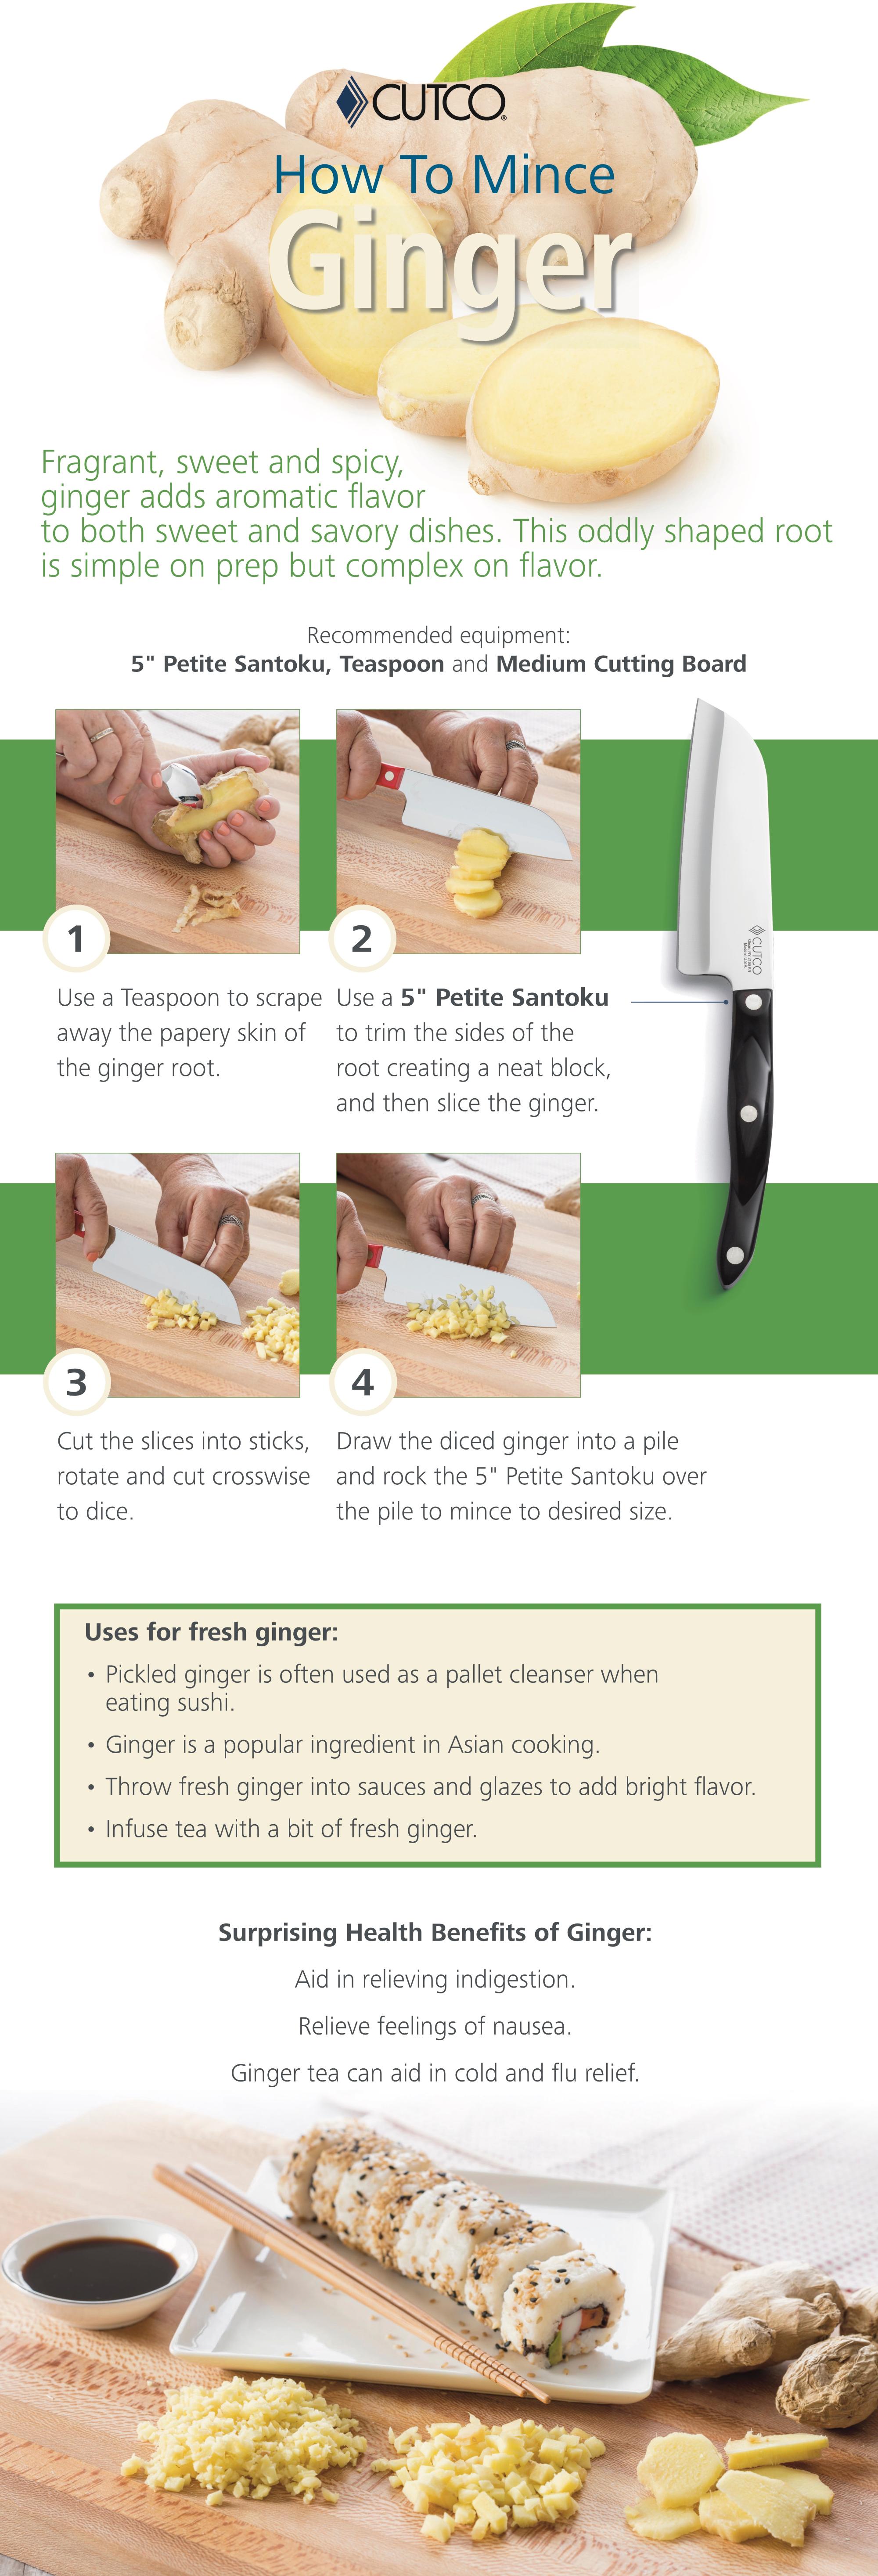 How To Mince Ginger